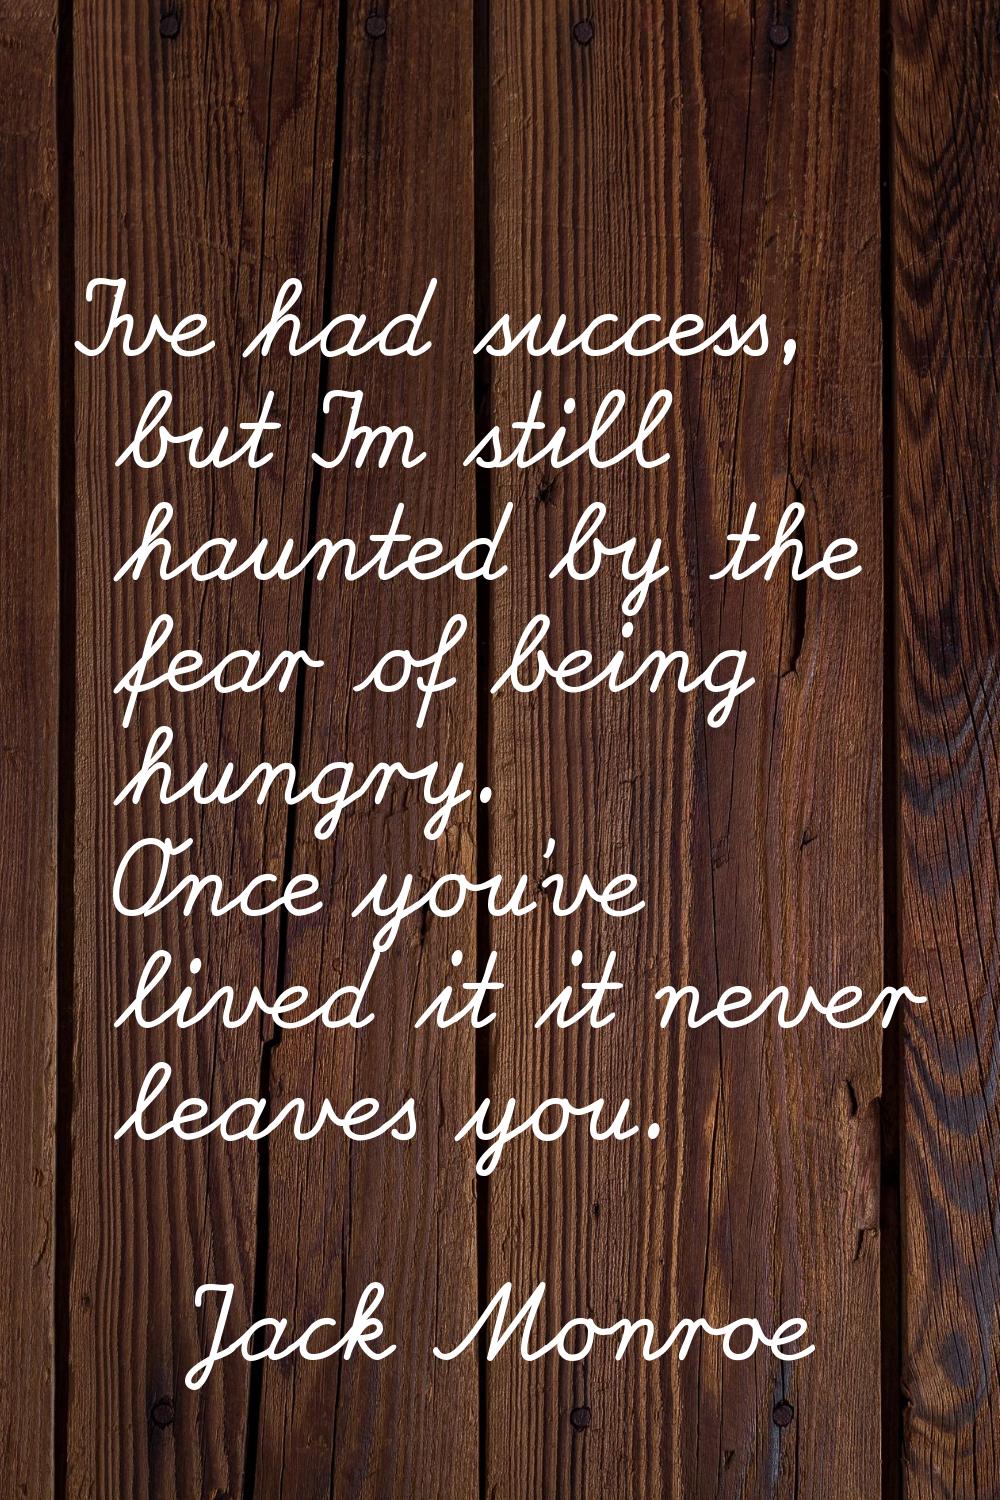 I've had success, but I'm still haunted by the fear of being hungry. Once you've lived it it never 